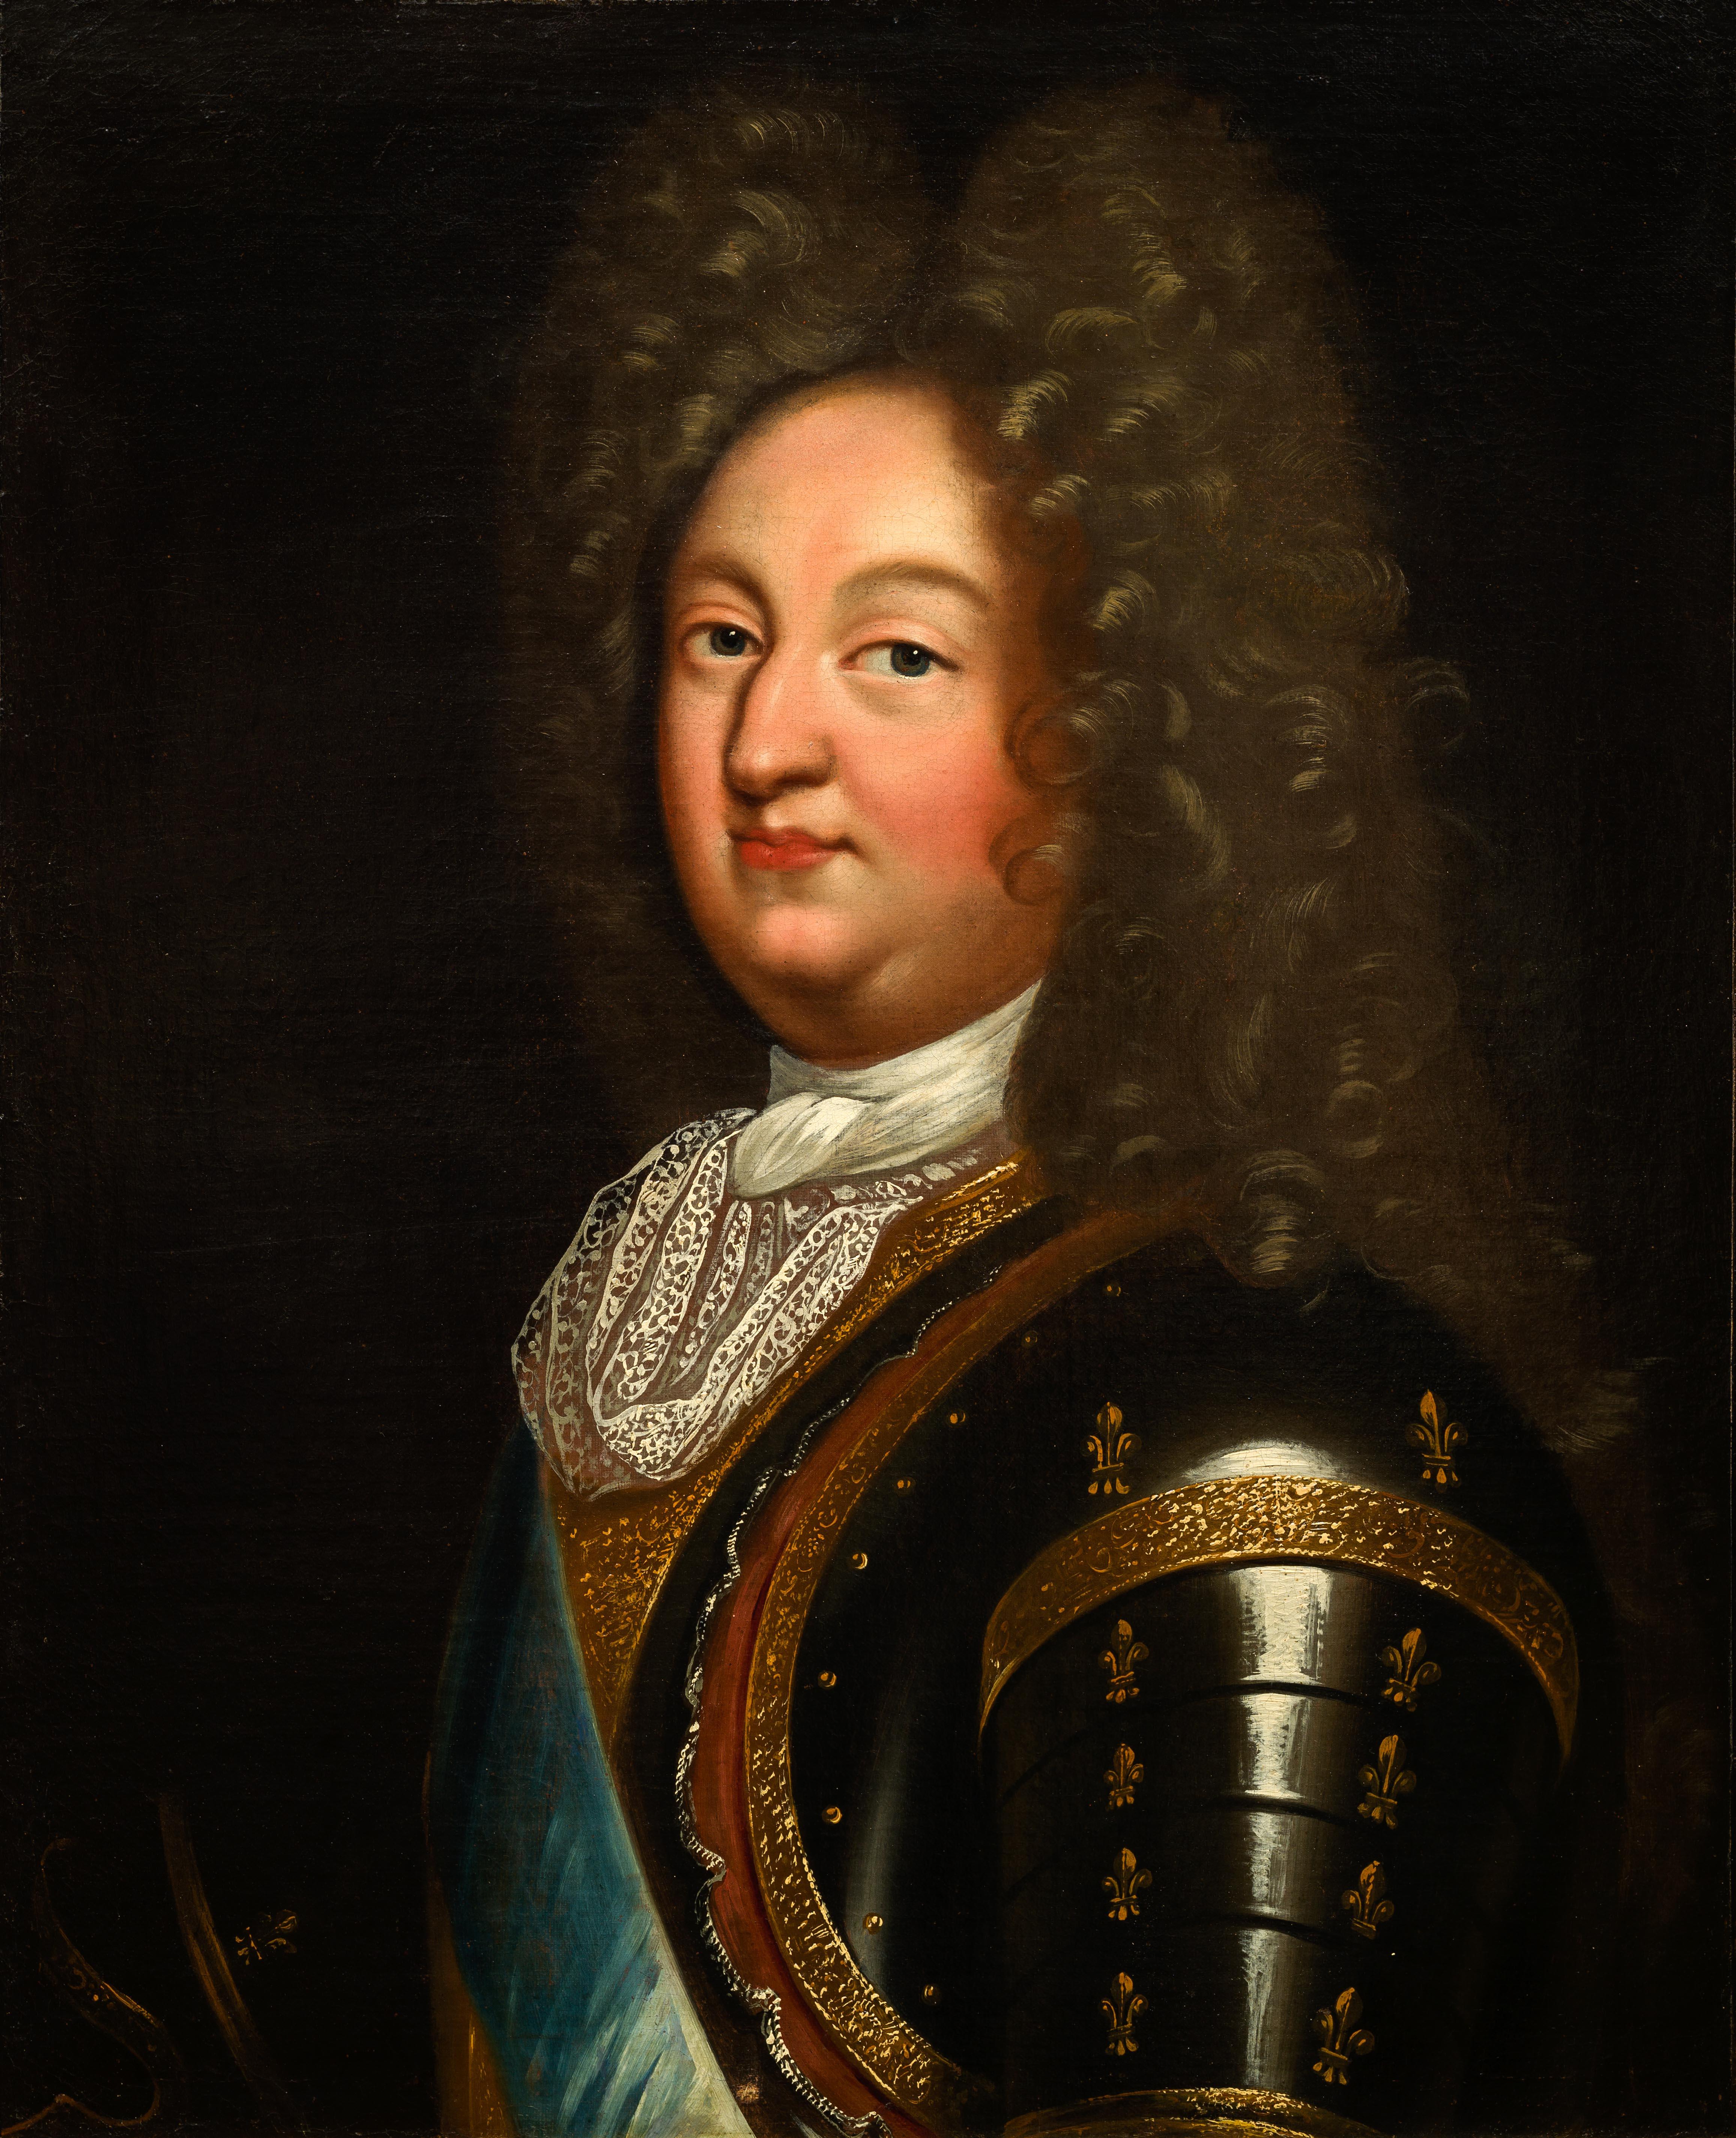 Louis XIV's portrait  - Painting by Hyacinthe Rigaud